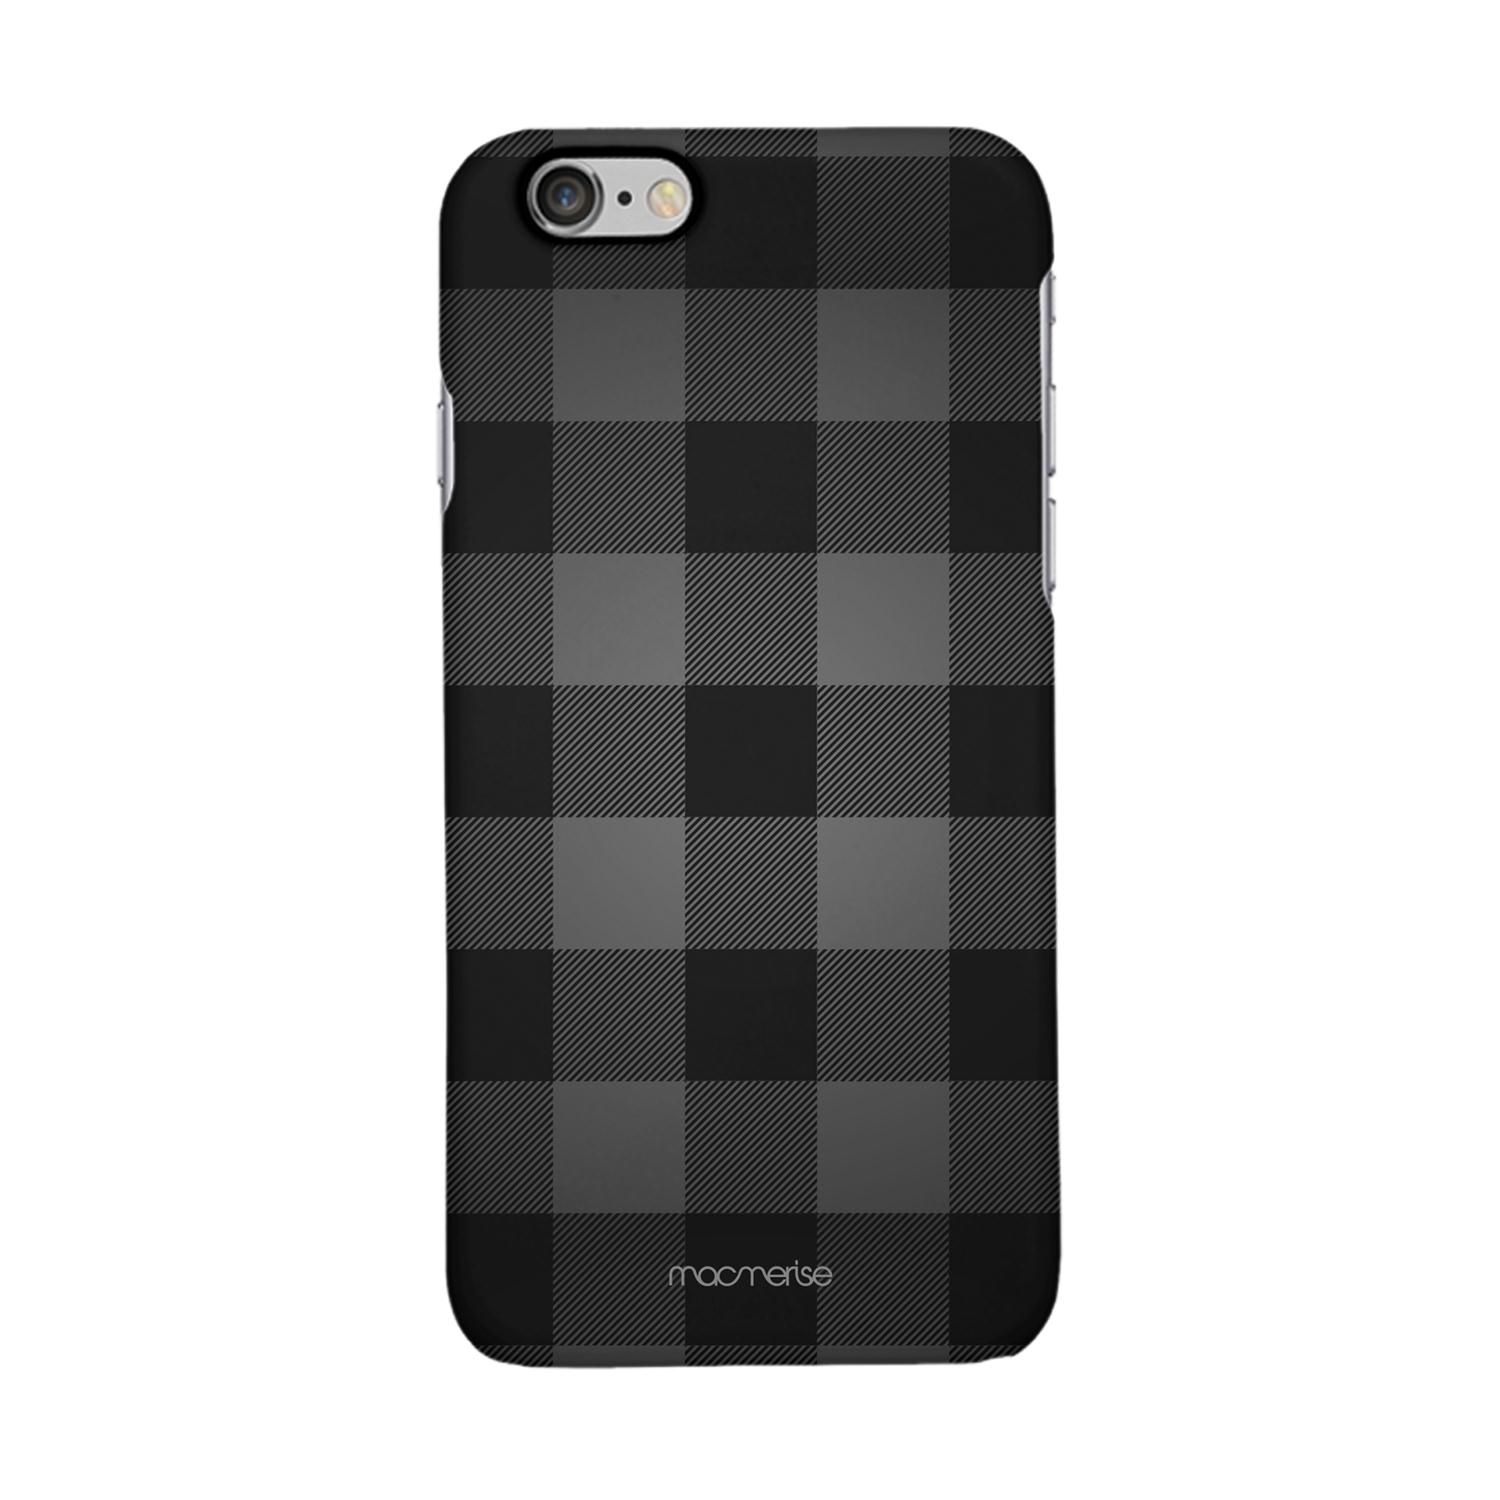 Checkmate Black - Sleek Phone Case for iPhone 6